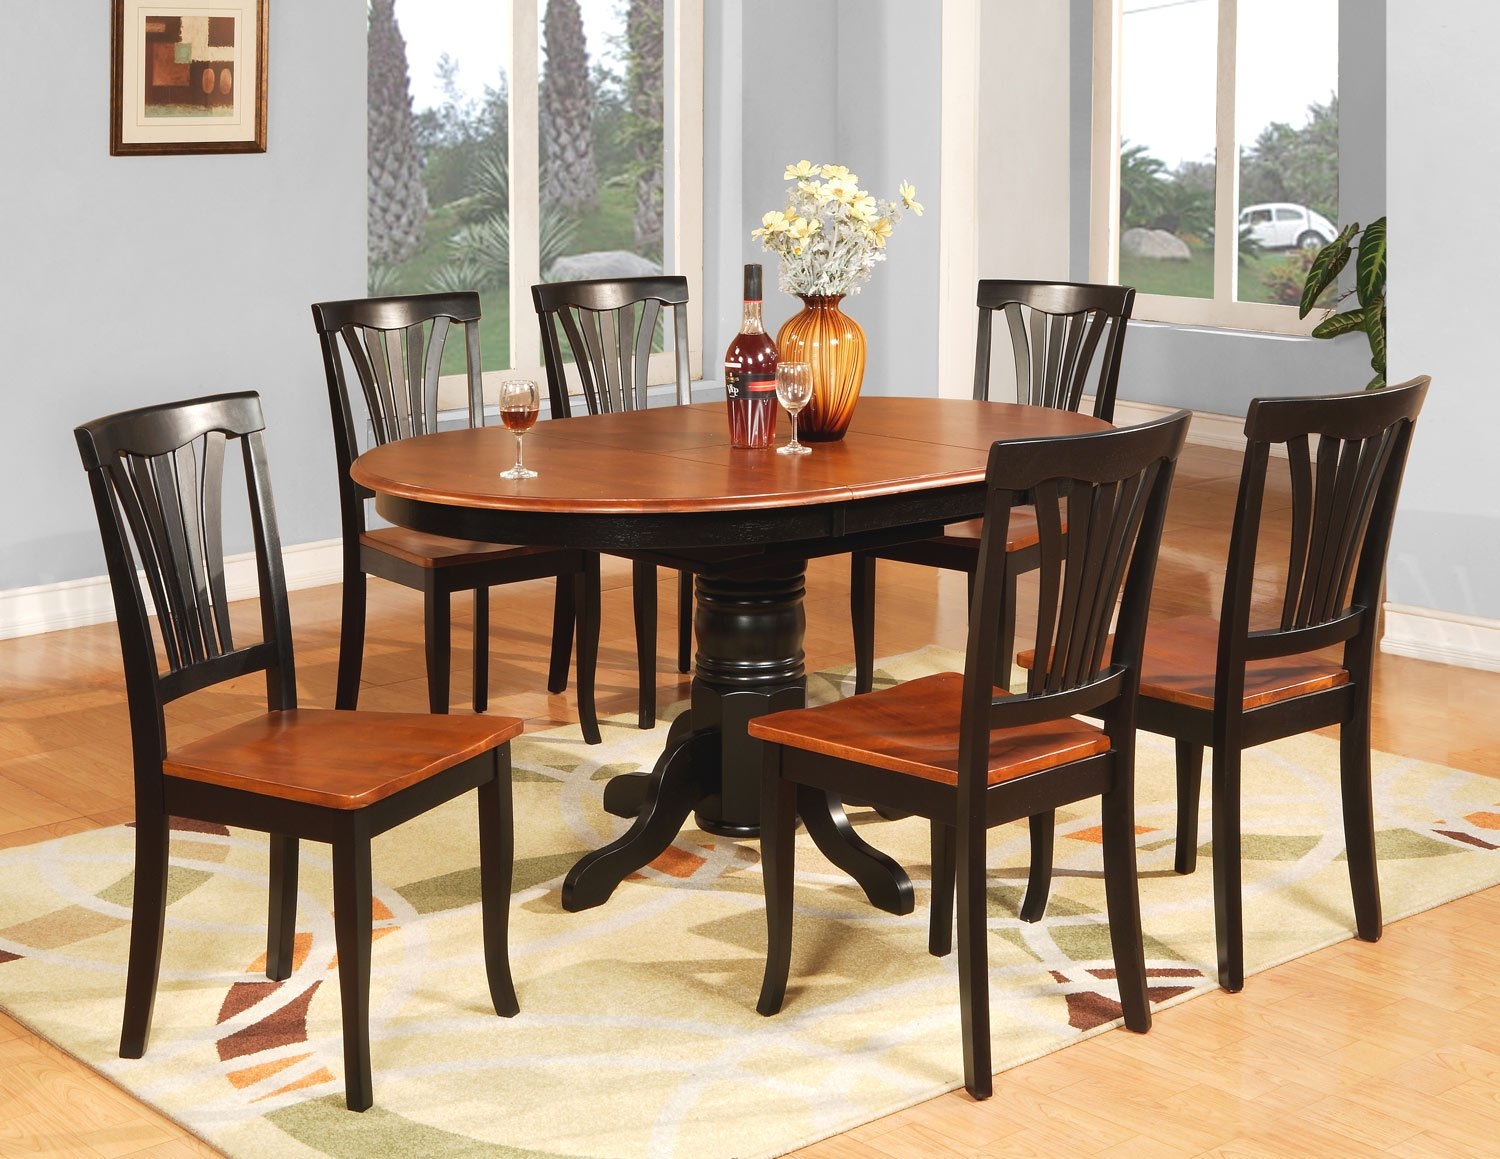 East West Furniture AVON5-BLK-W 5PC Oval Dining Set with Single Pedestal with 18 in. leaf Avon Table and 4 wood seat chairs